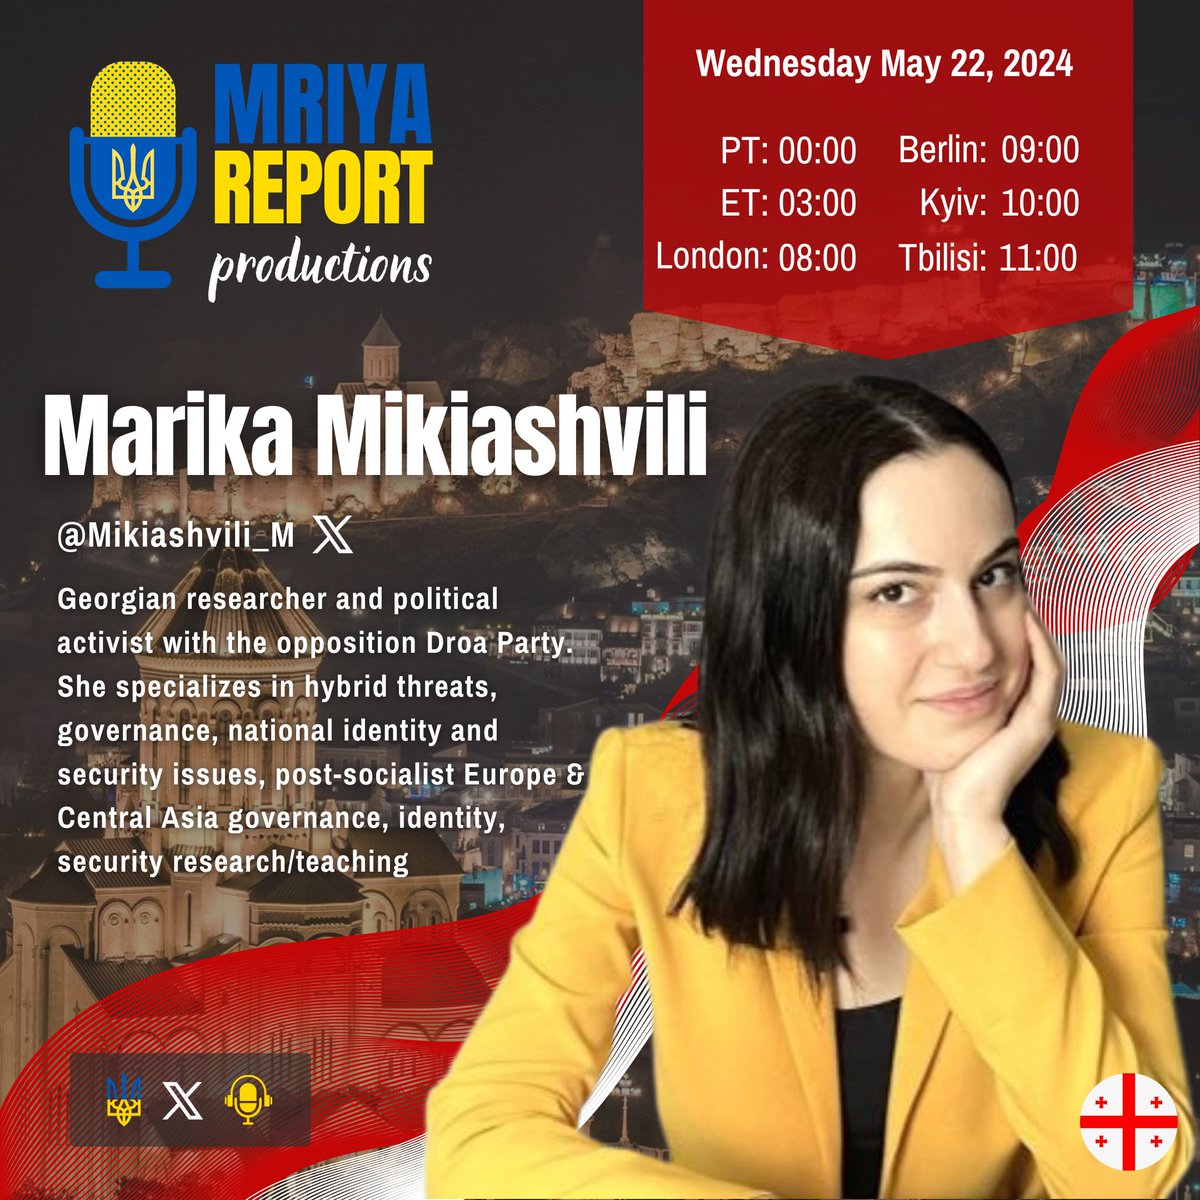 🇬🇪 Please join us Wednesday, May 22 🇬🇪 for a conversation with our very special guest Marika Mikiashvili @Mikiashvili_M! Marika is a #Georgian researcher and political activist with the opposition Droa Party. She specializes in hybrid threats, governance, national identity and